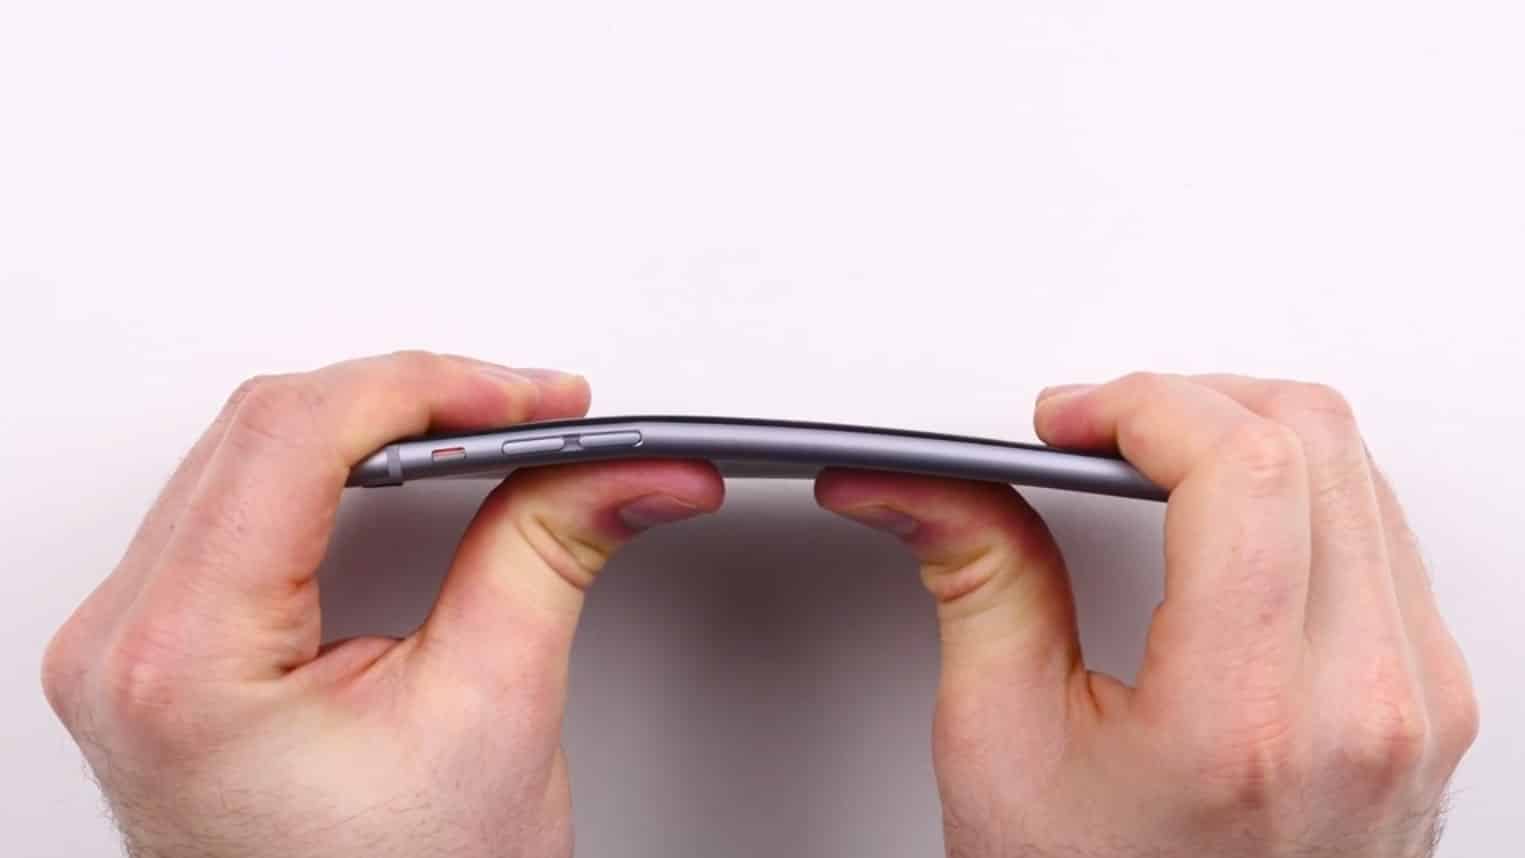 VIDEO: You Can Bend The iPhone 6 Plus With Your Bare Hands